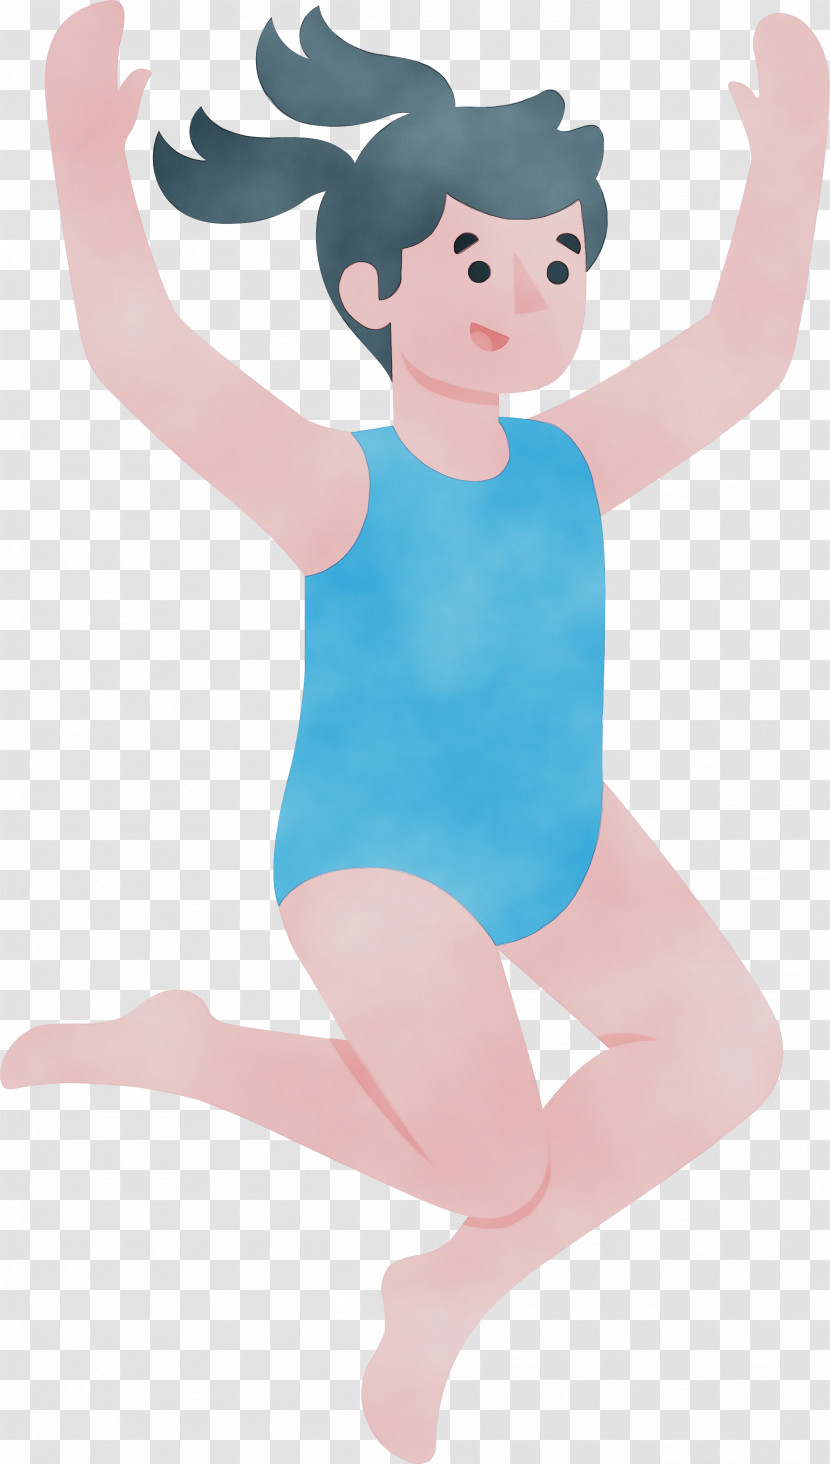 Leotard Cartoon Character Shoe Character Created By Transparent PNG